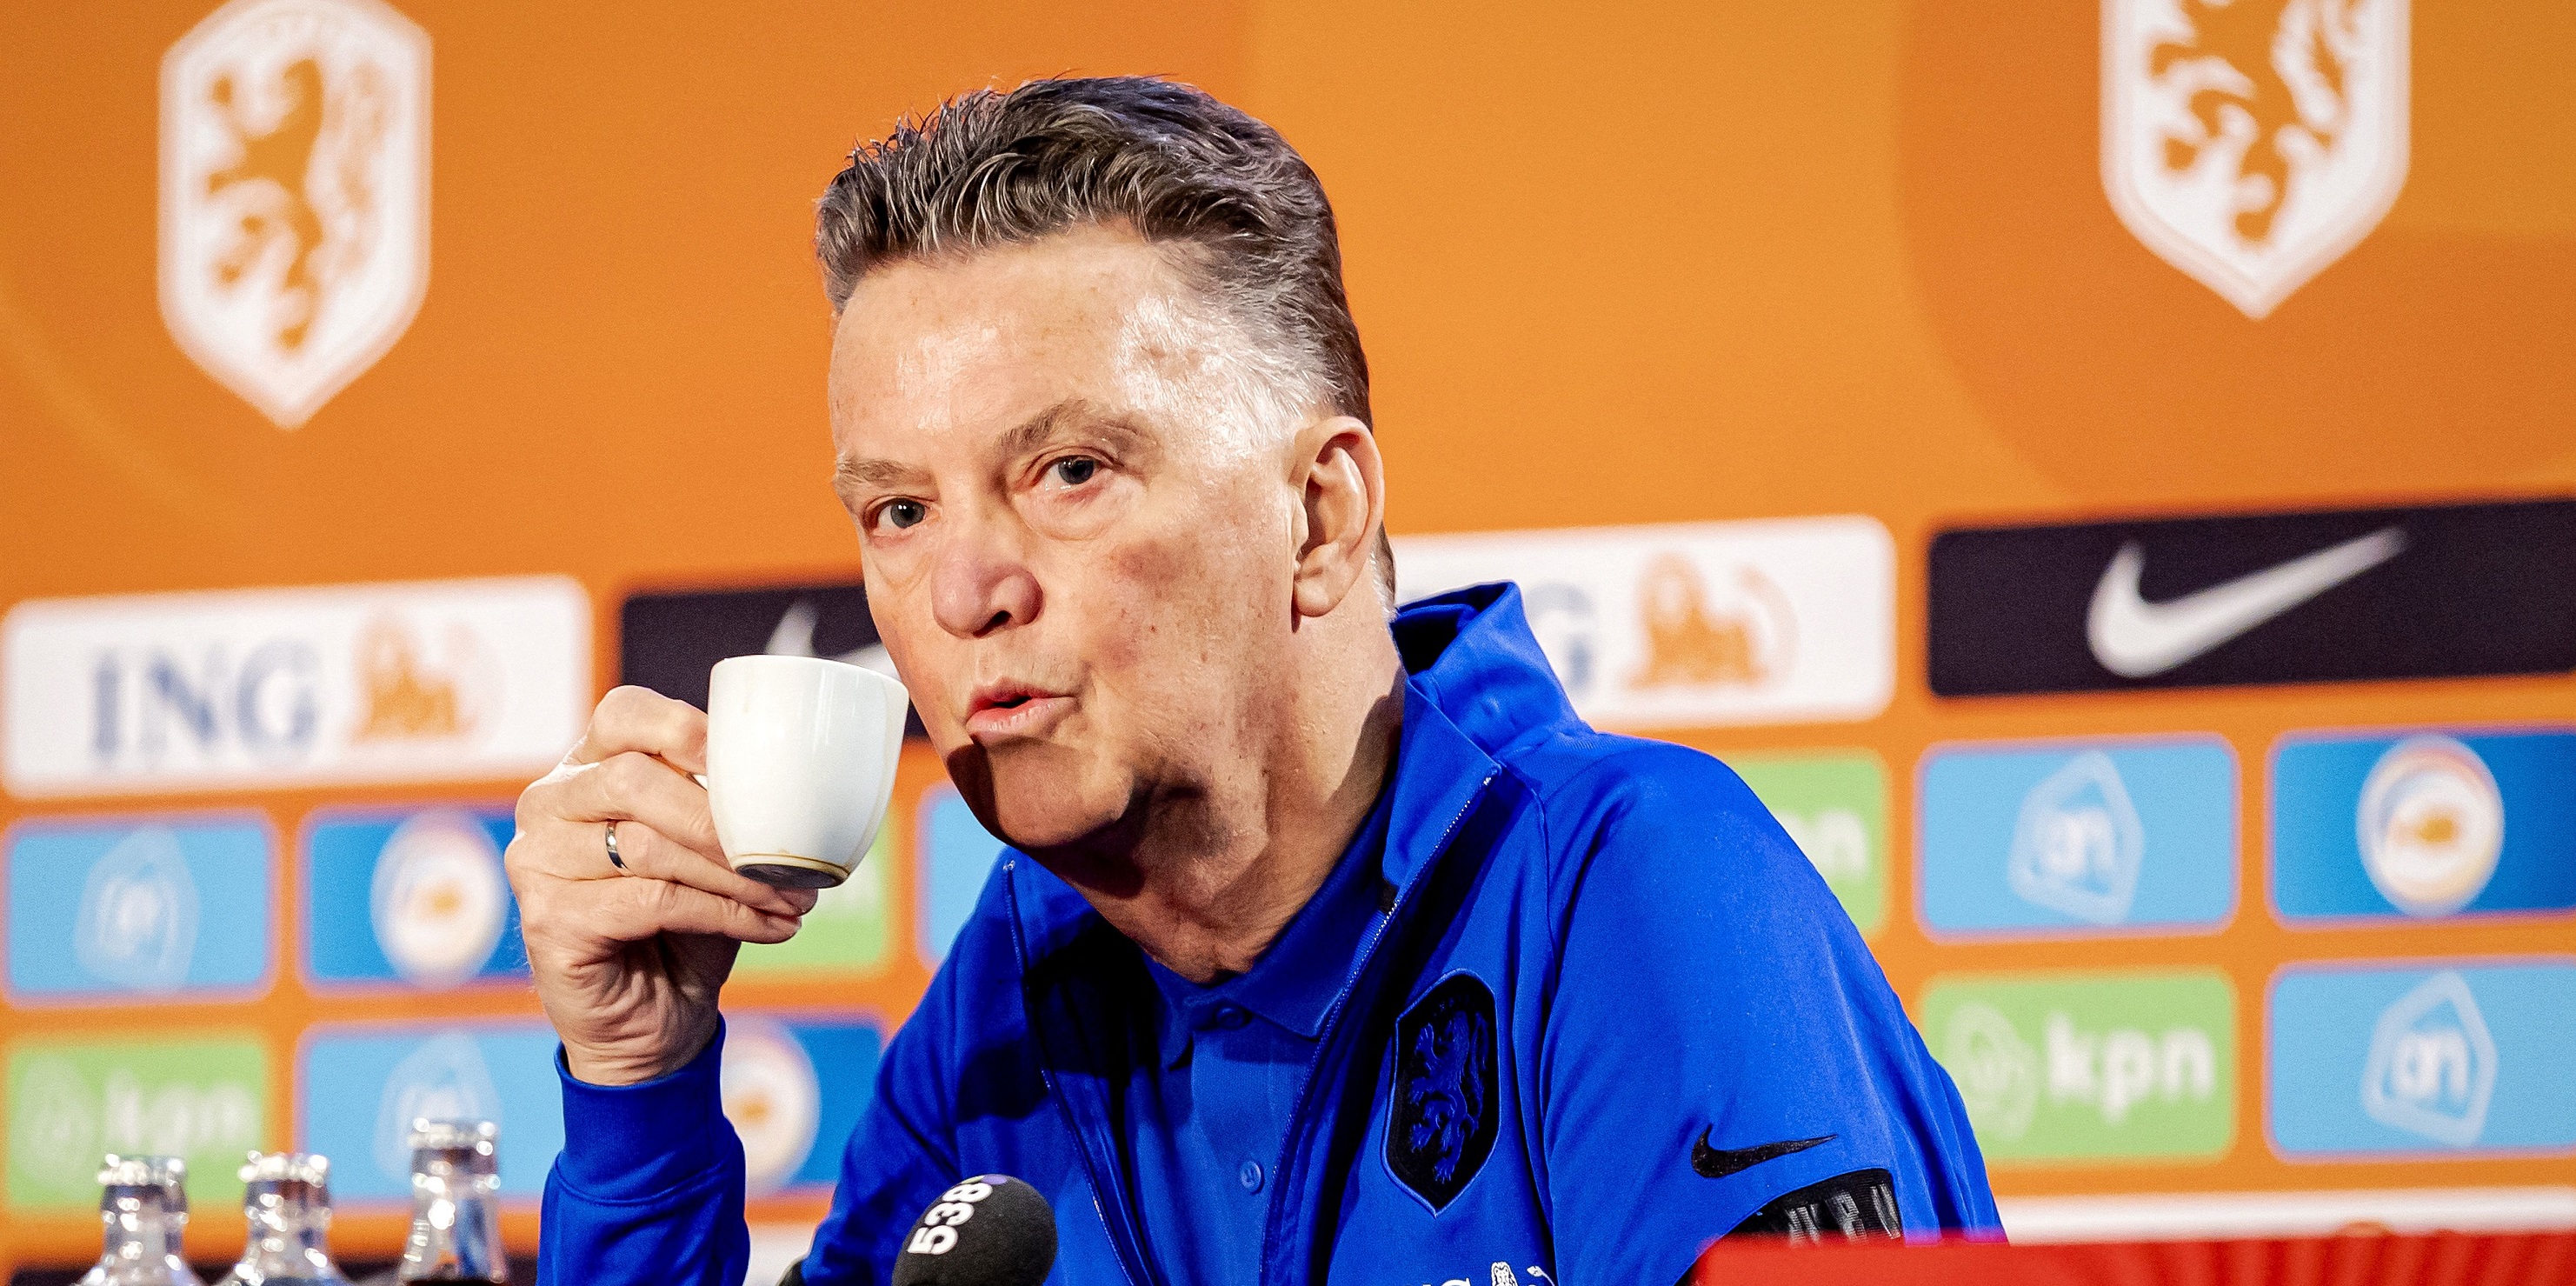 Ex-United boss Louis Van Gaal delivers scathing assessment of FIFA ahead of Qatar World Cup